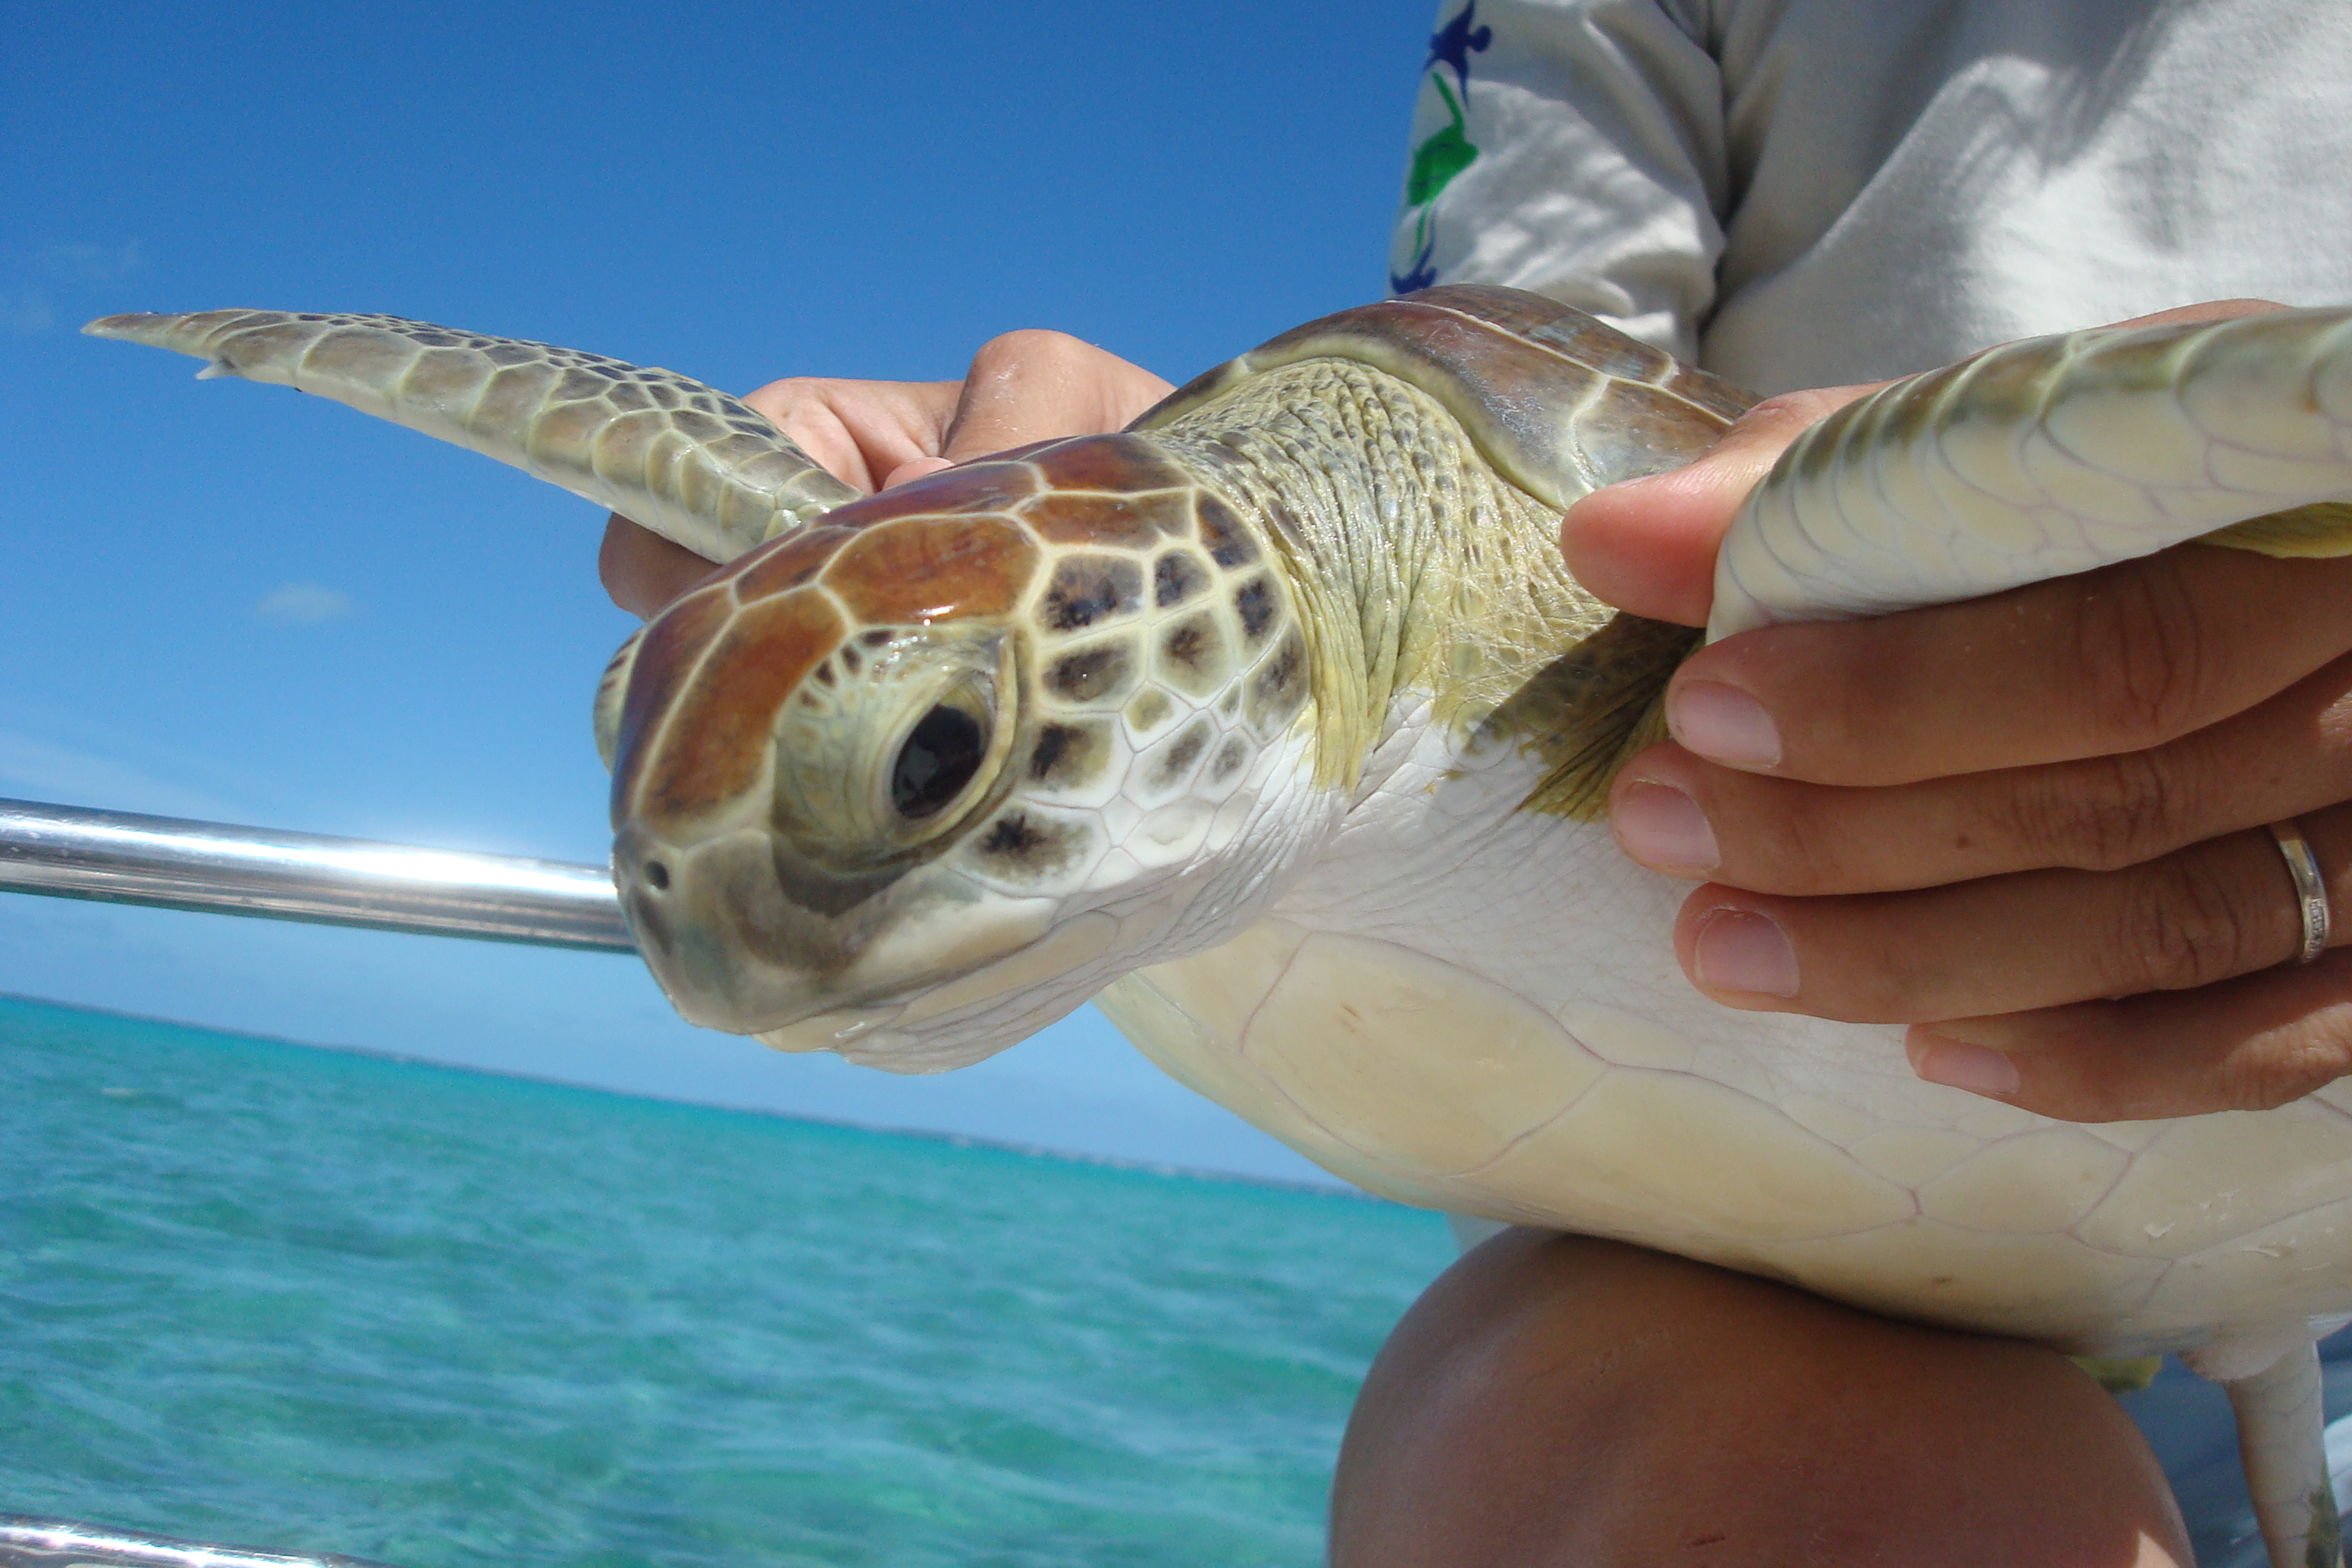 An Earthwatch volunteer holding a sea turtle.